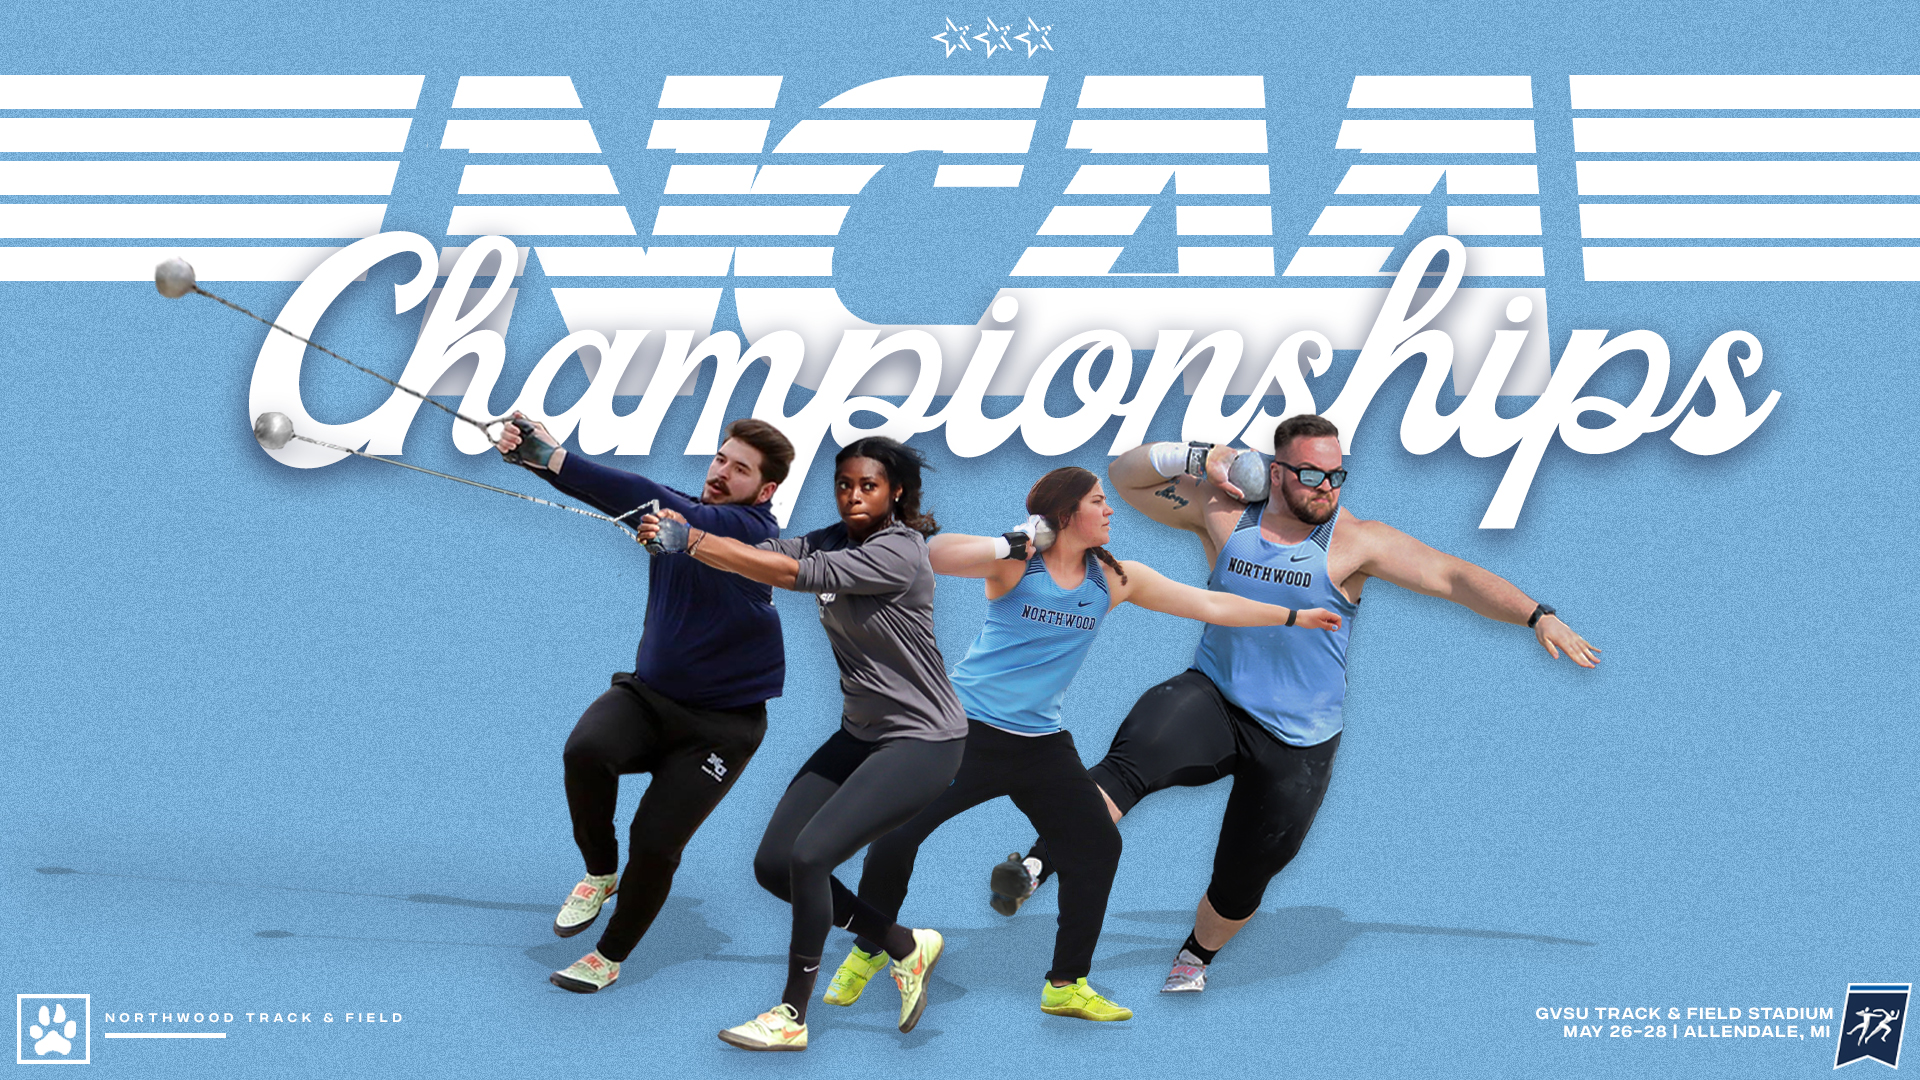 Track & Field Earns Multiple All-America Honors At The DII Outdoor Track & Field Championships